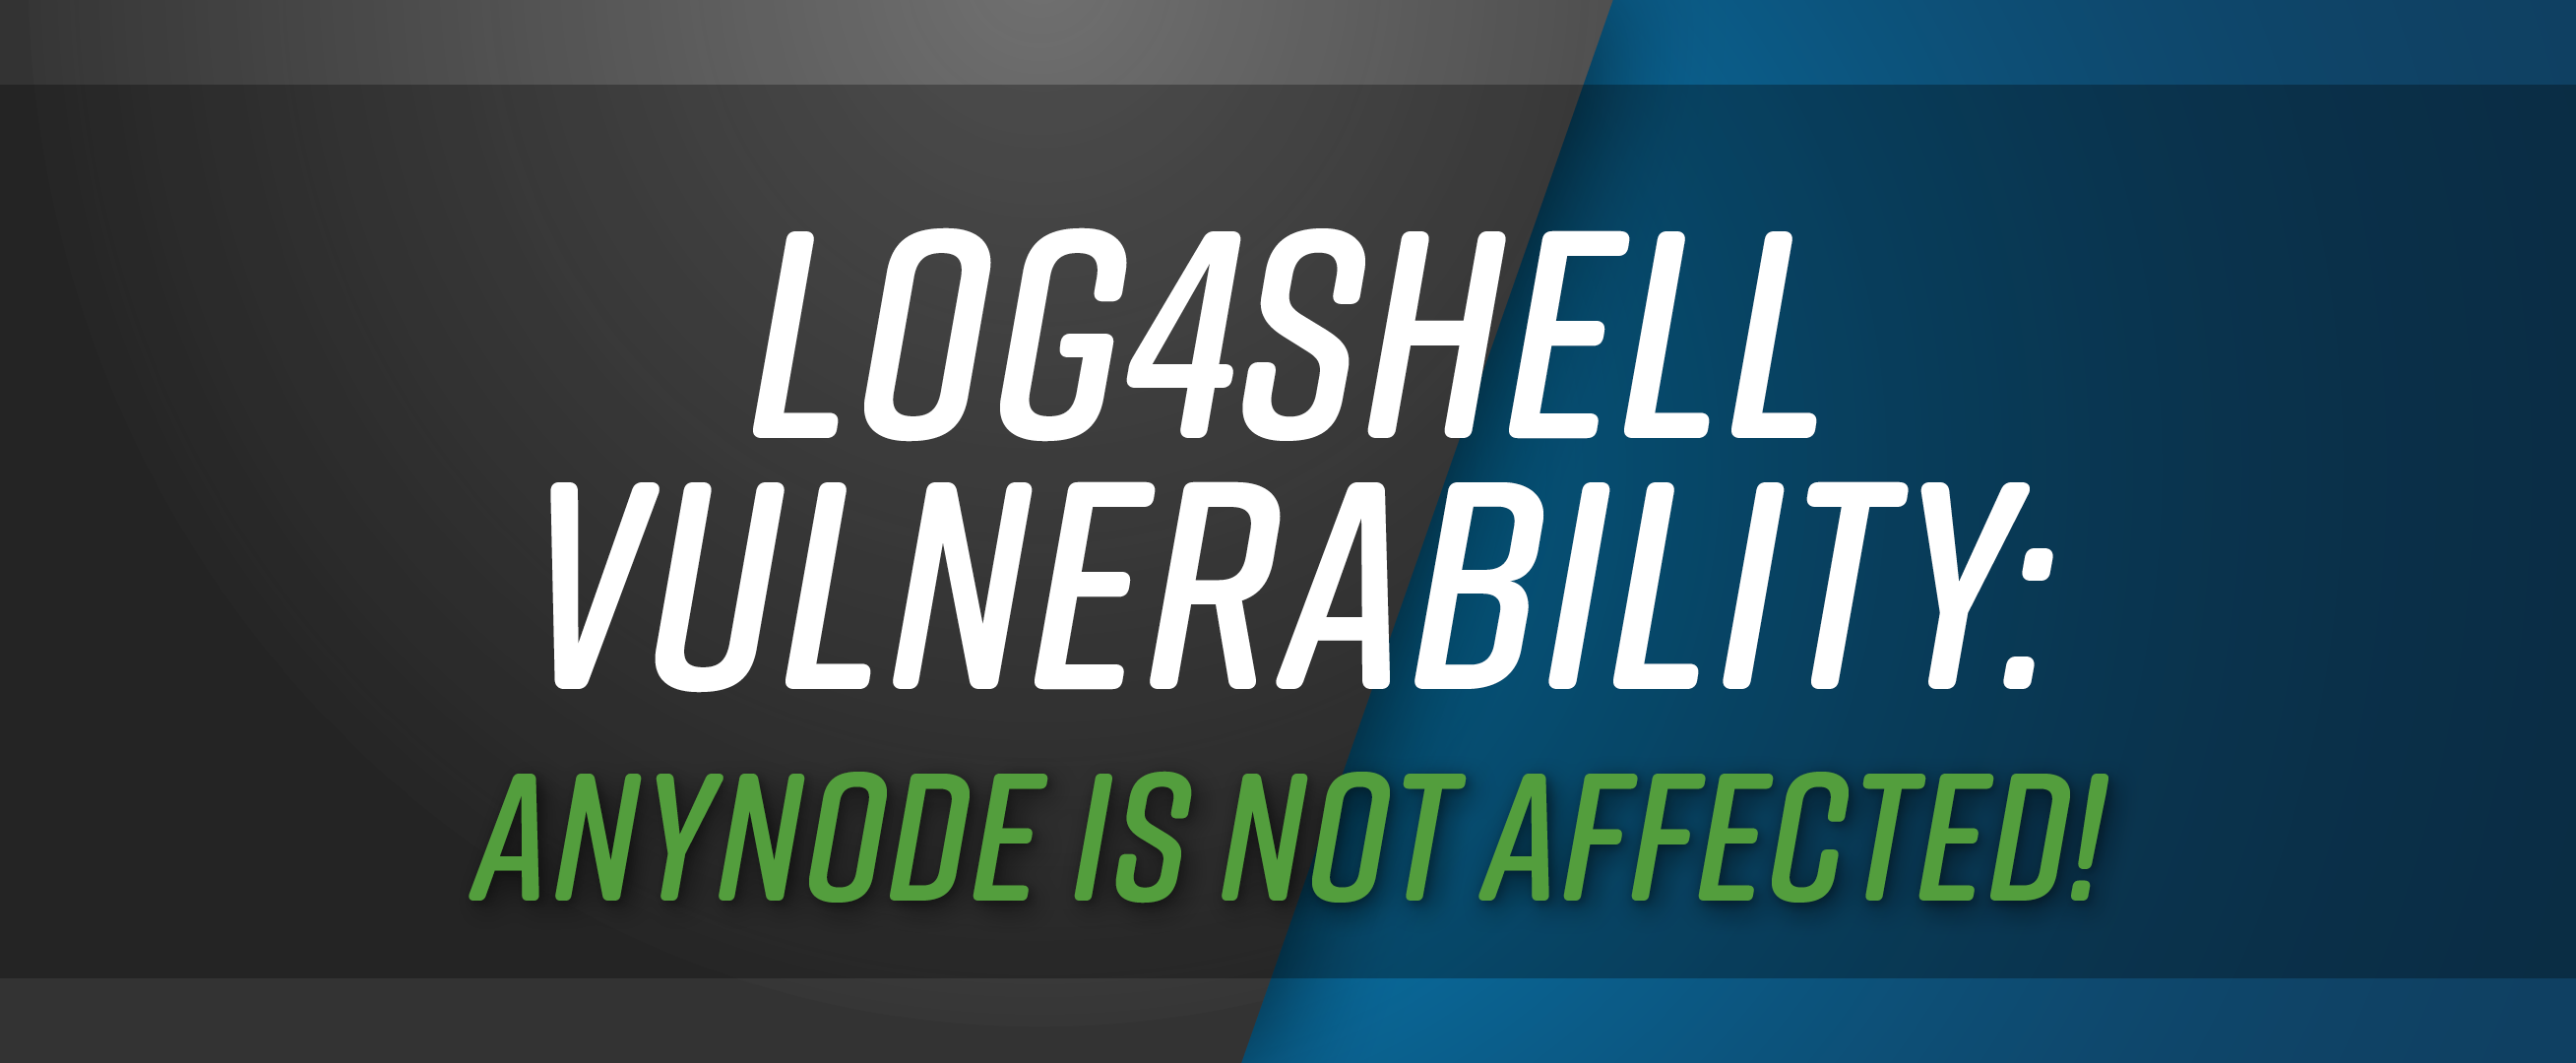 Log4Shell vulnerability: anynode is not affected